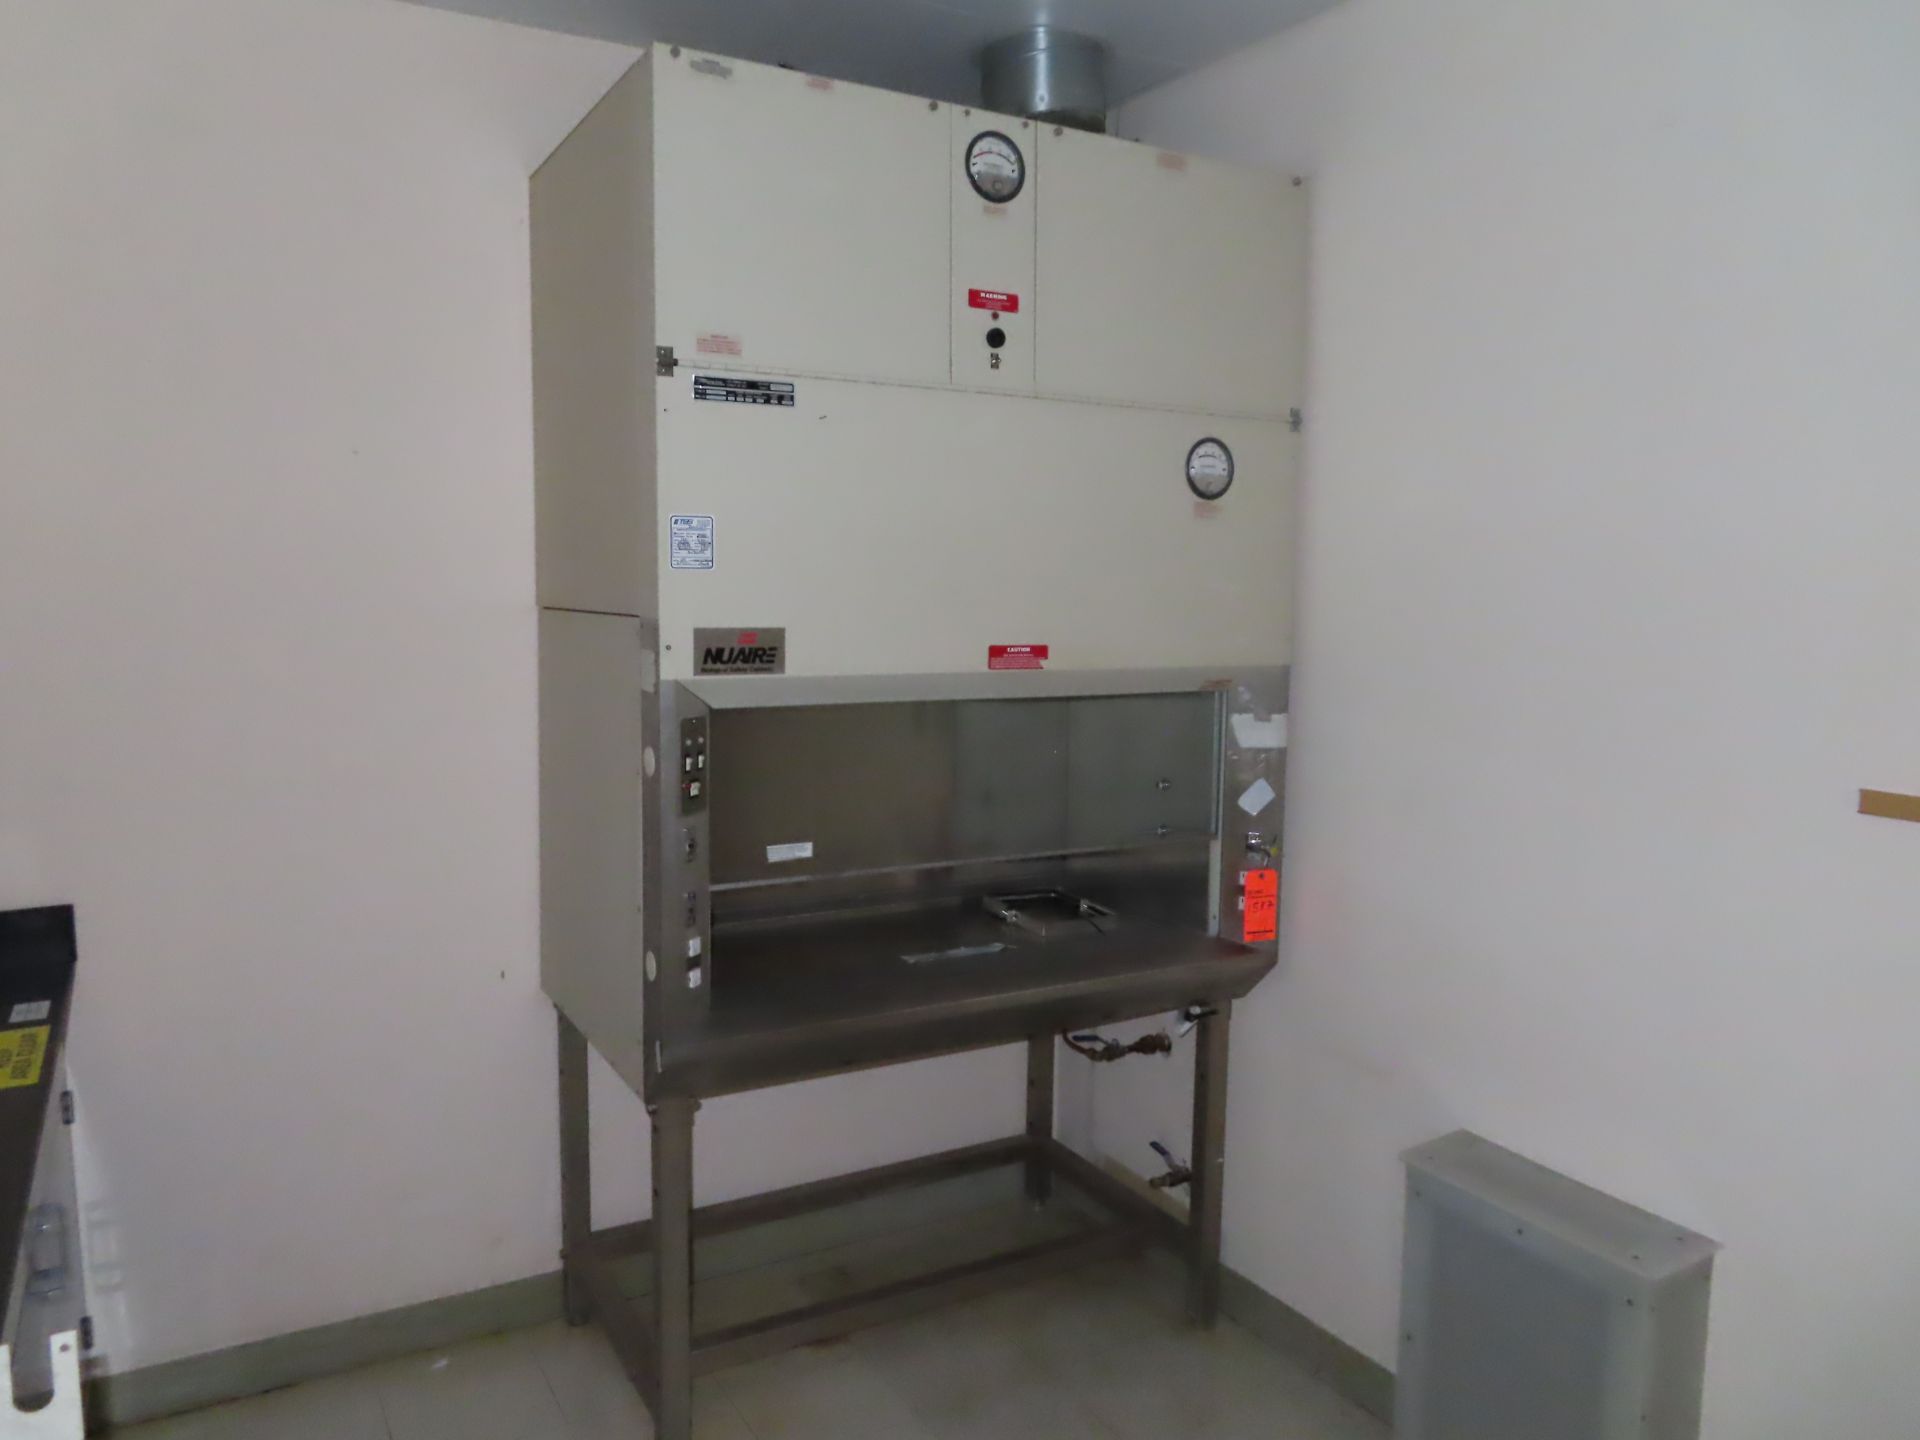 NuAire NU-415-400 fume hood, s/n 13129RY, 3'7" X 23", located wing A, 3rd floor, room 309F - Image 2 of 2